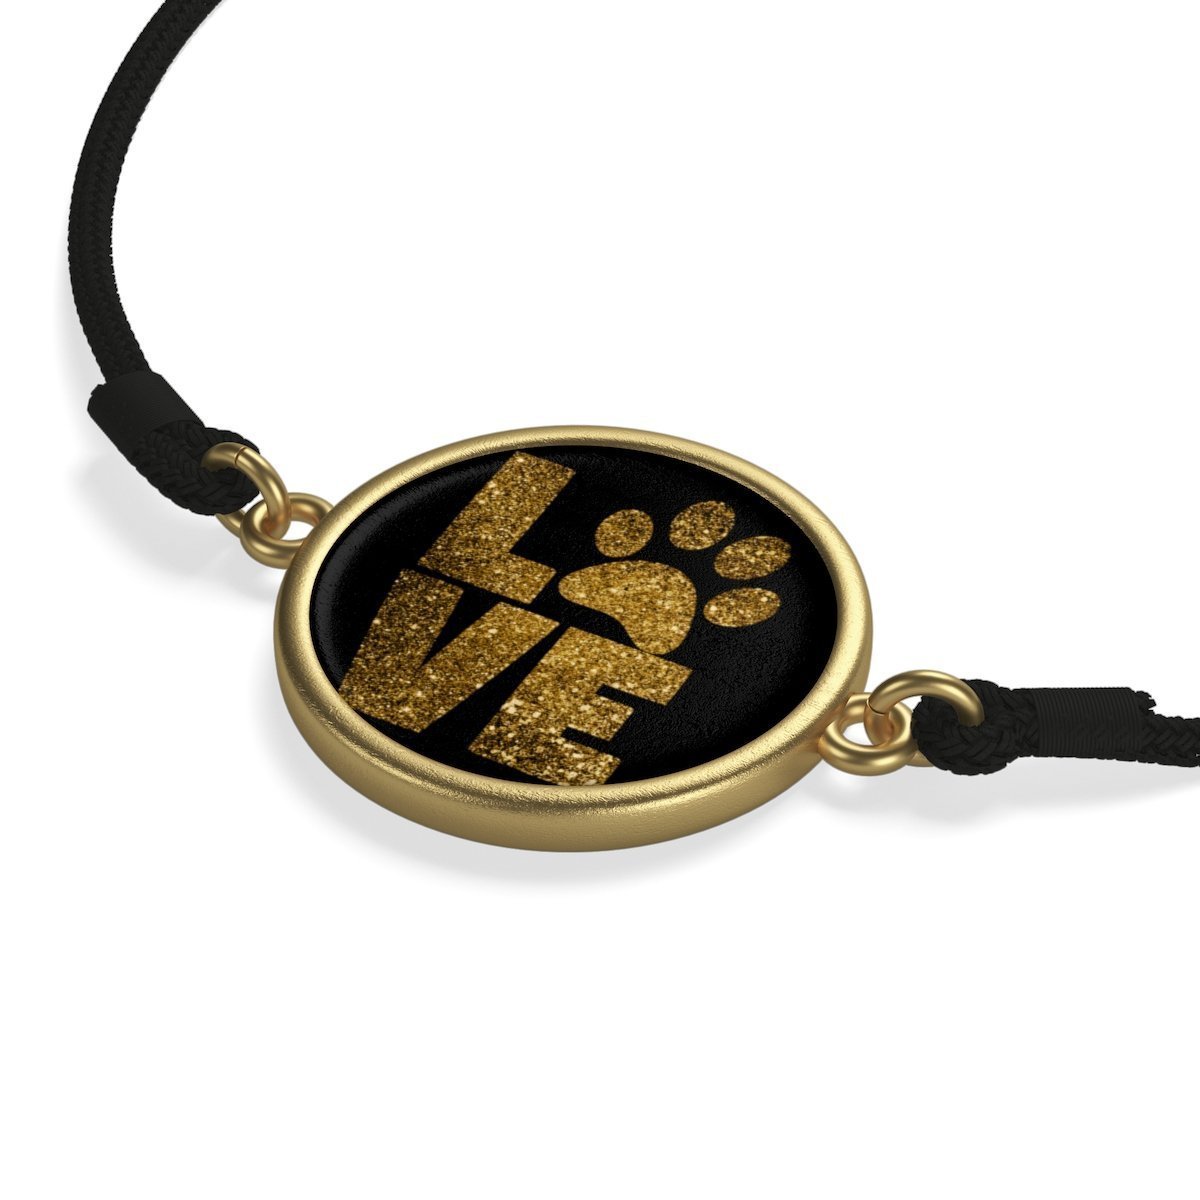 Cheap Gifts for Cat Lovers, Paw Print Bracelet Featuring the Text Love and a Paw Print on a Gold Plated Charm